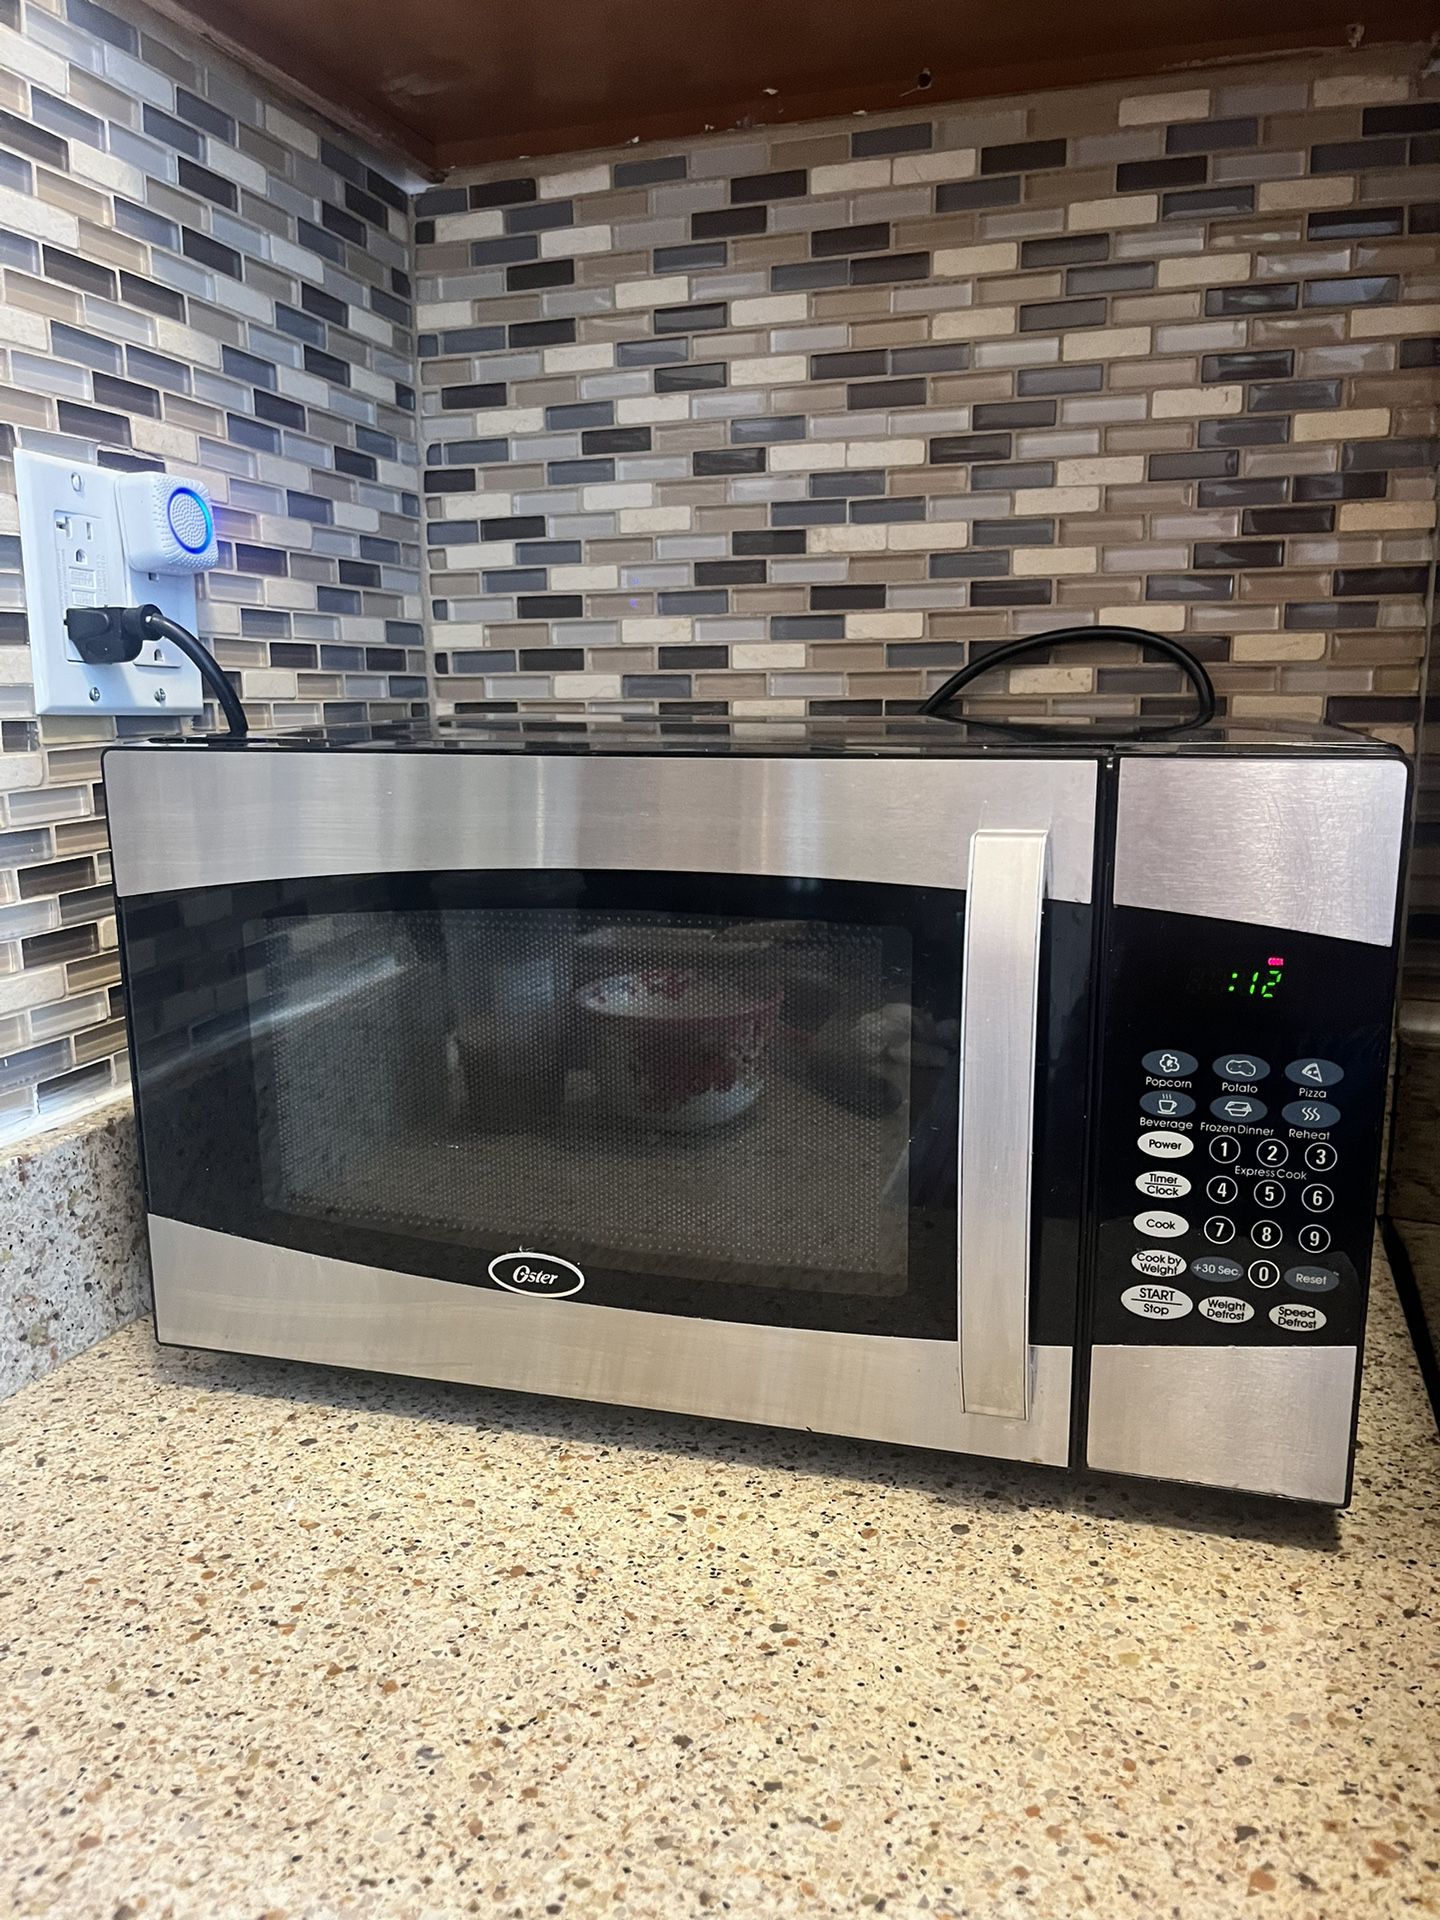 Oster Stainless Steel Microwave